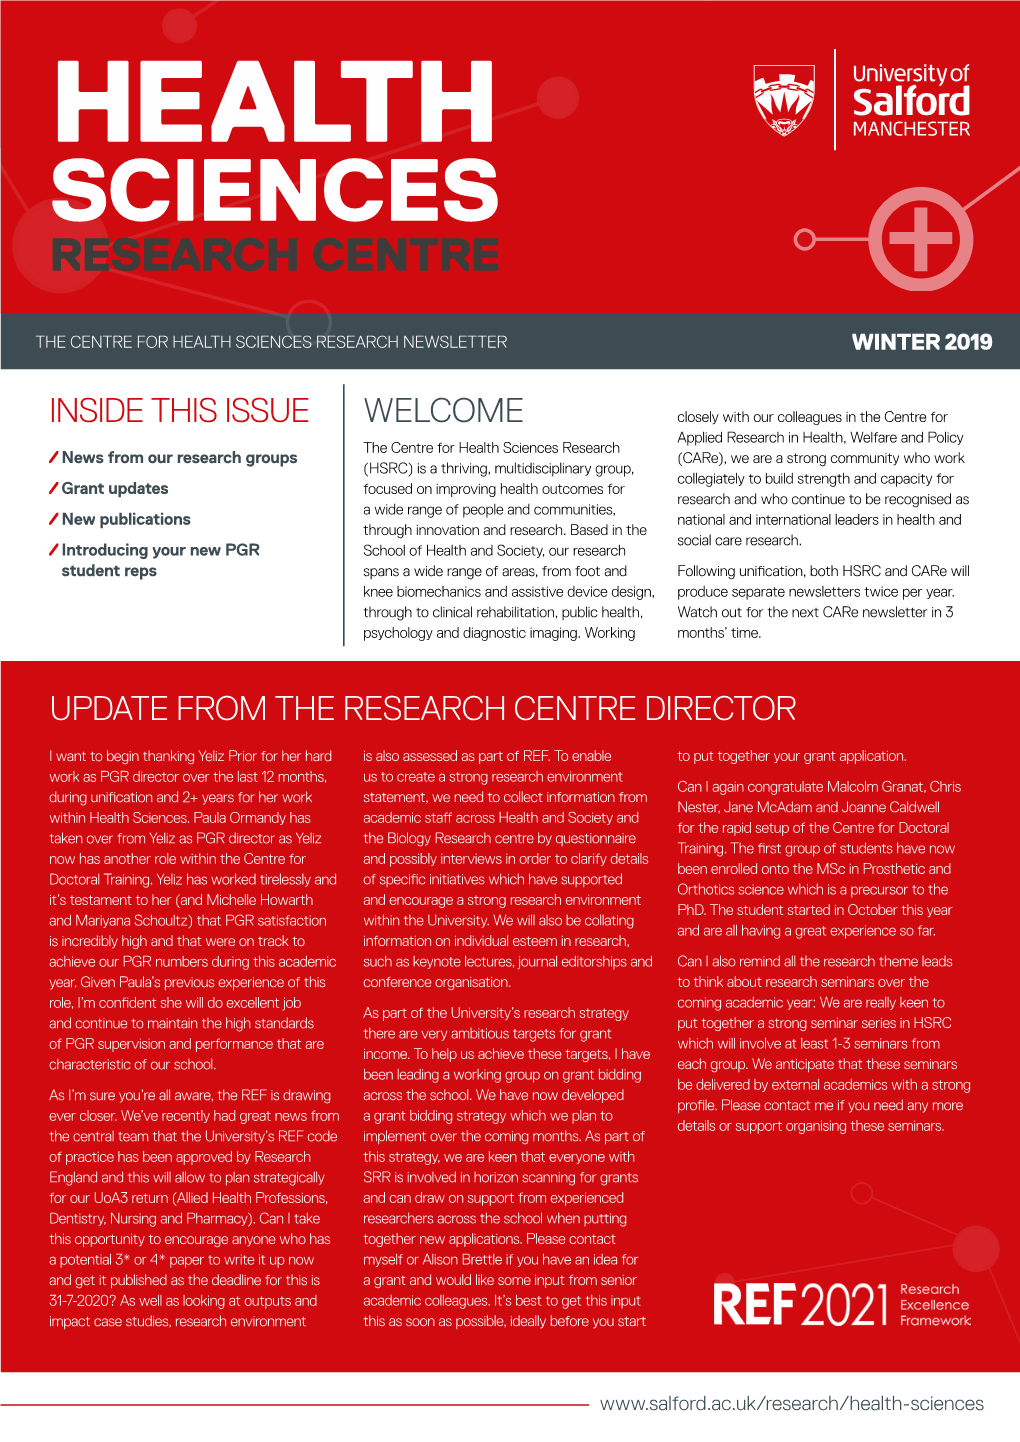 Health Sciences Research Newsletter Winter 2019